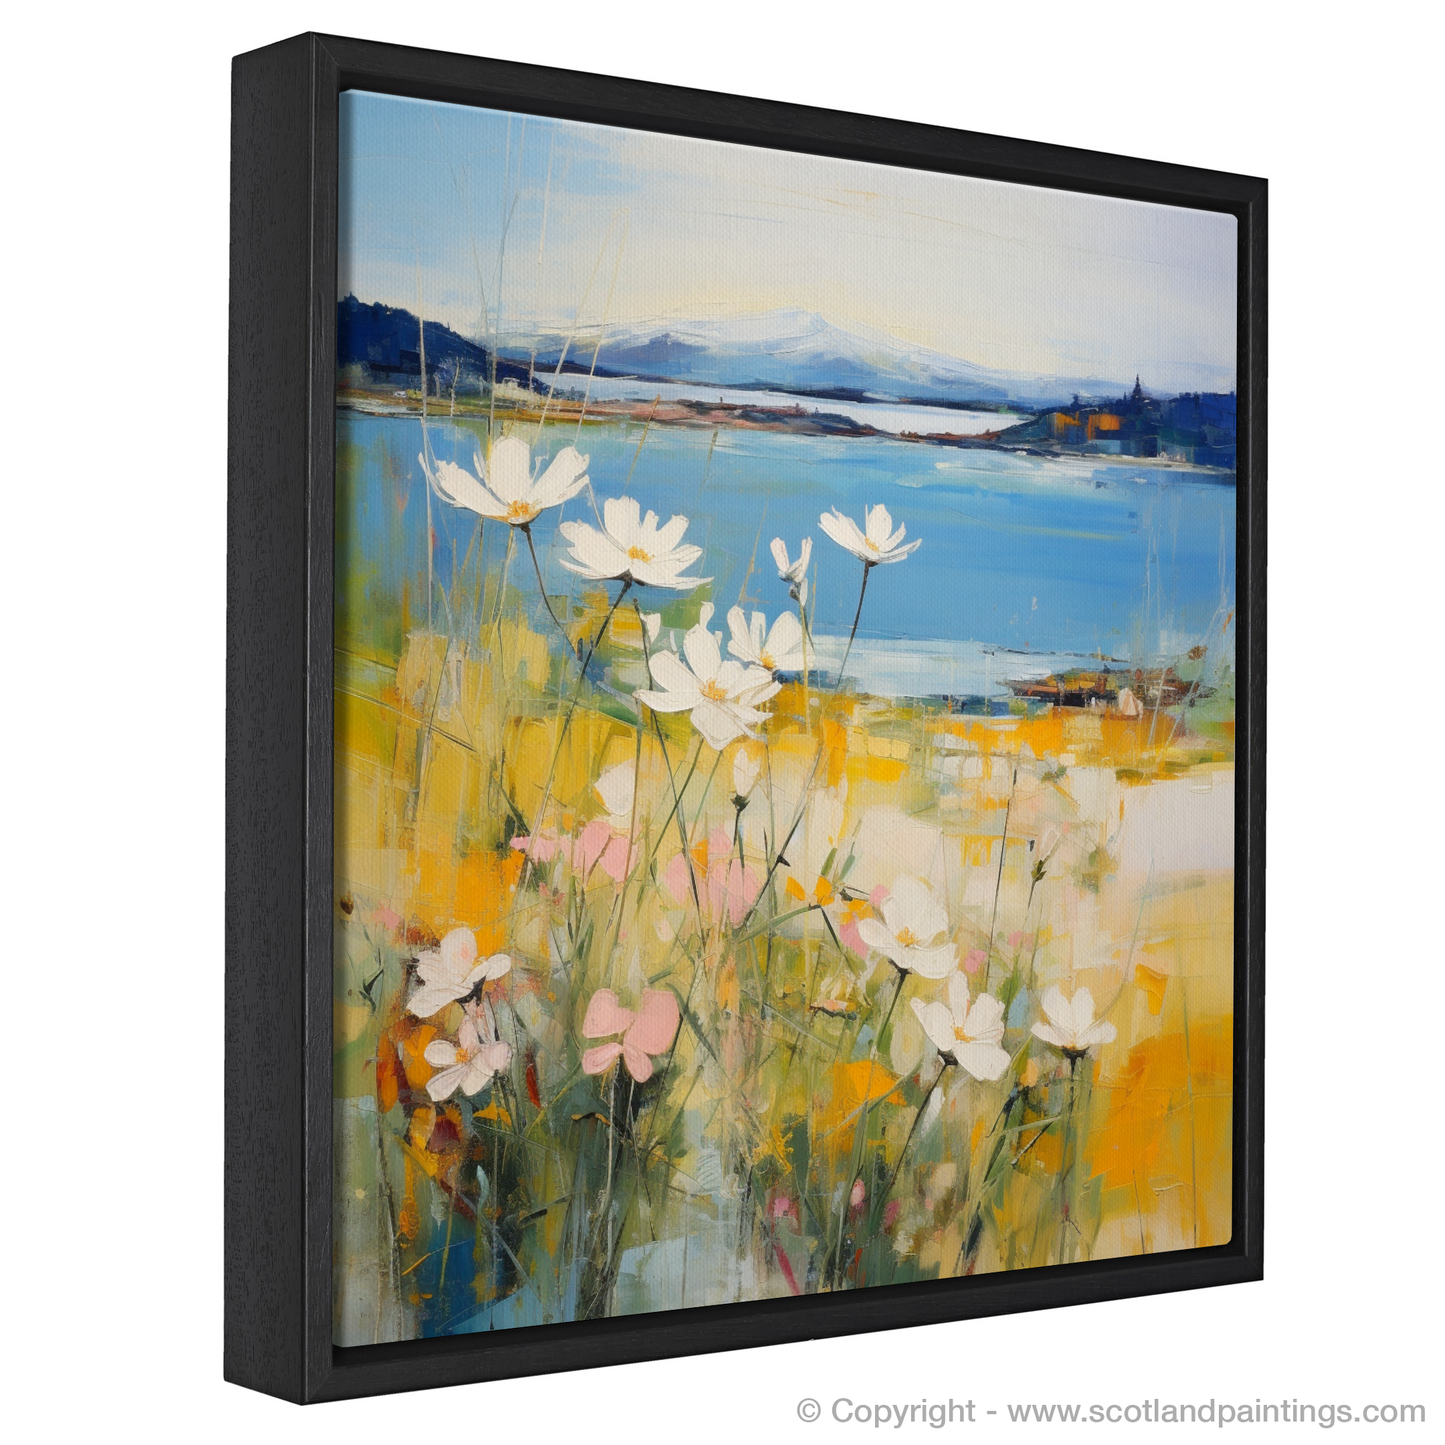 Painting and Art Print of Wildflowers by Loch Lomond entitled "Wildflowers Waltz by Loch Lomond".